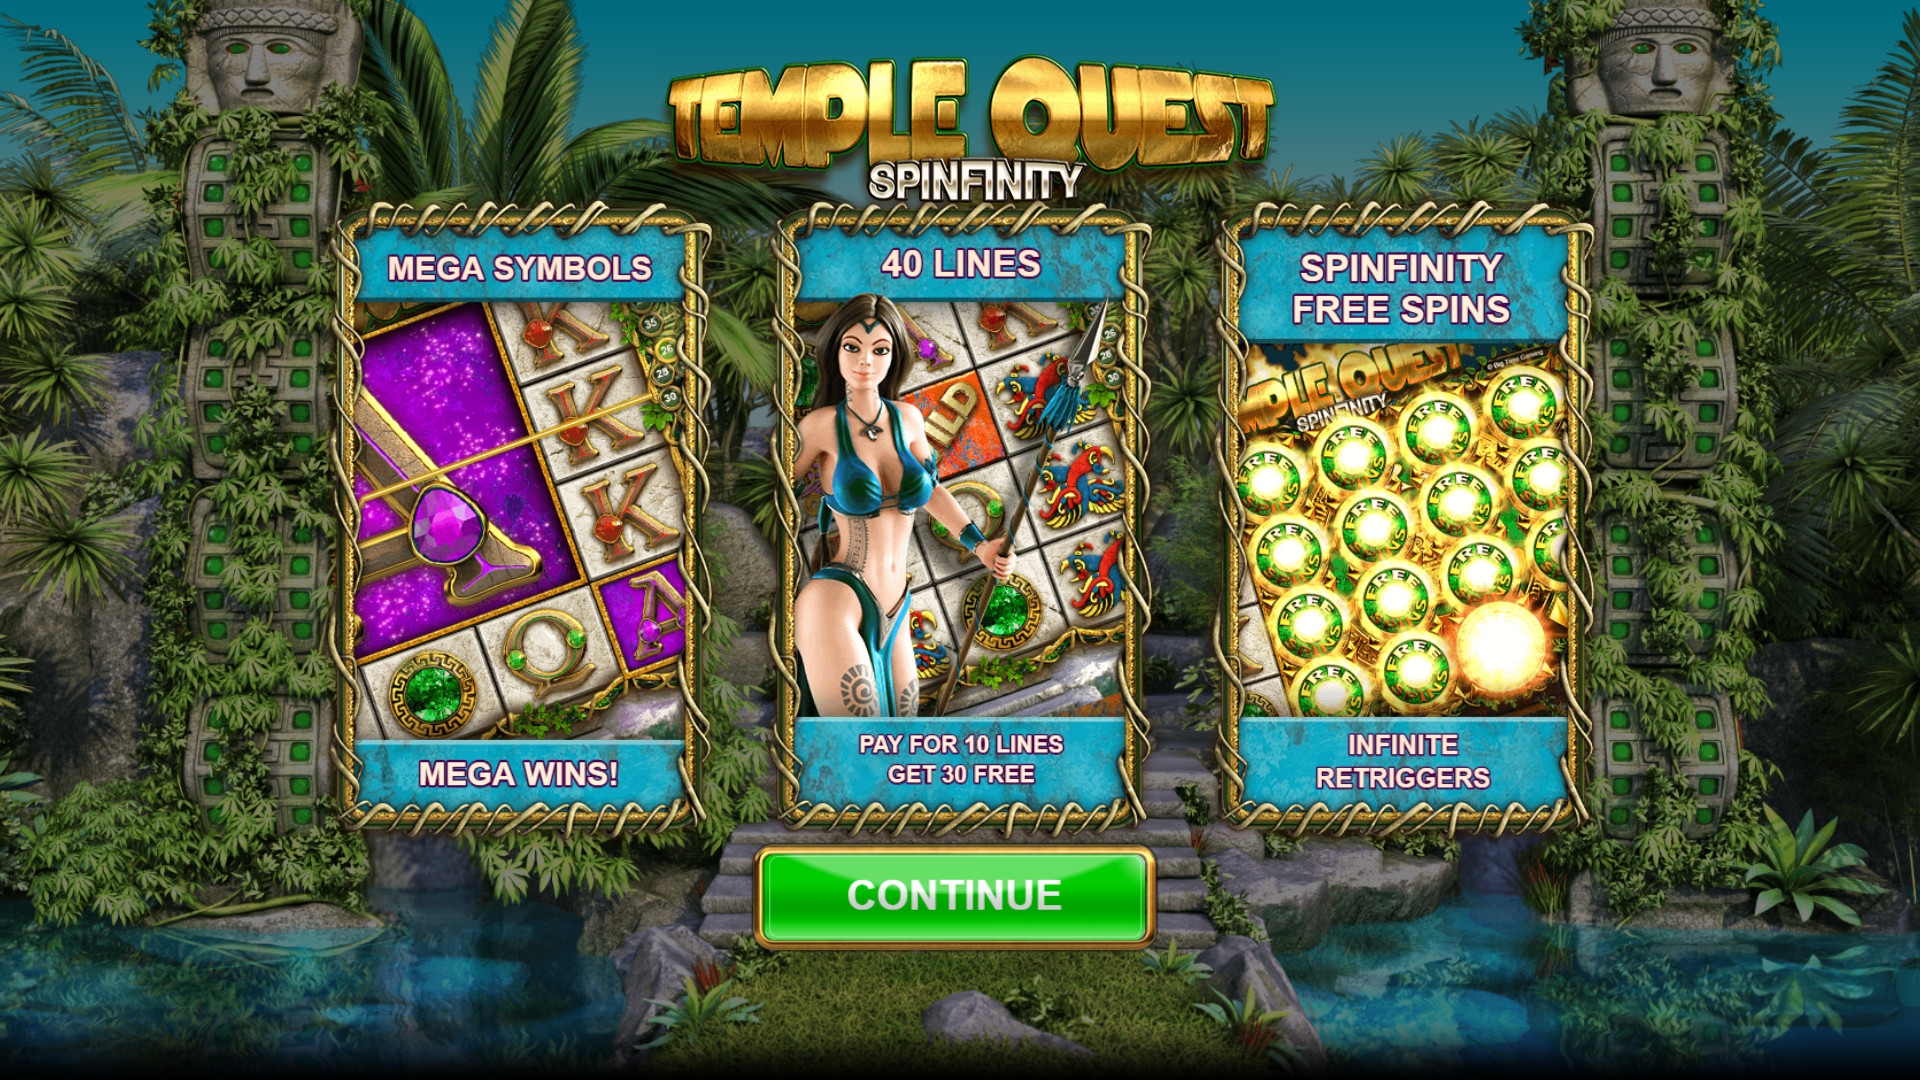 Temple Quest Spinfinity slot